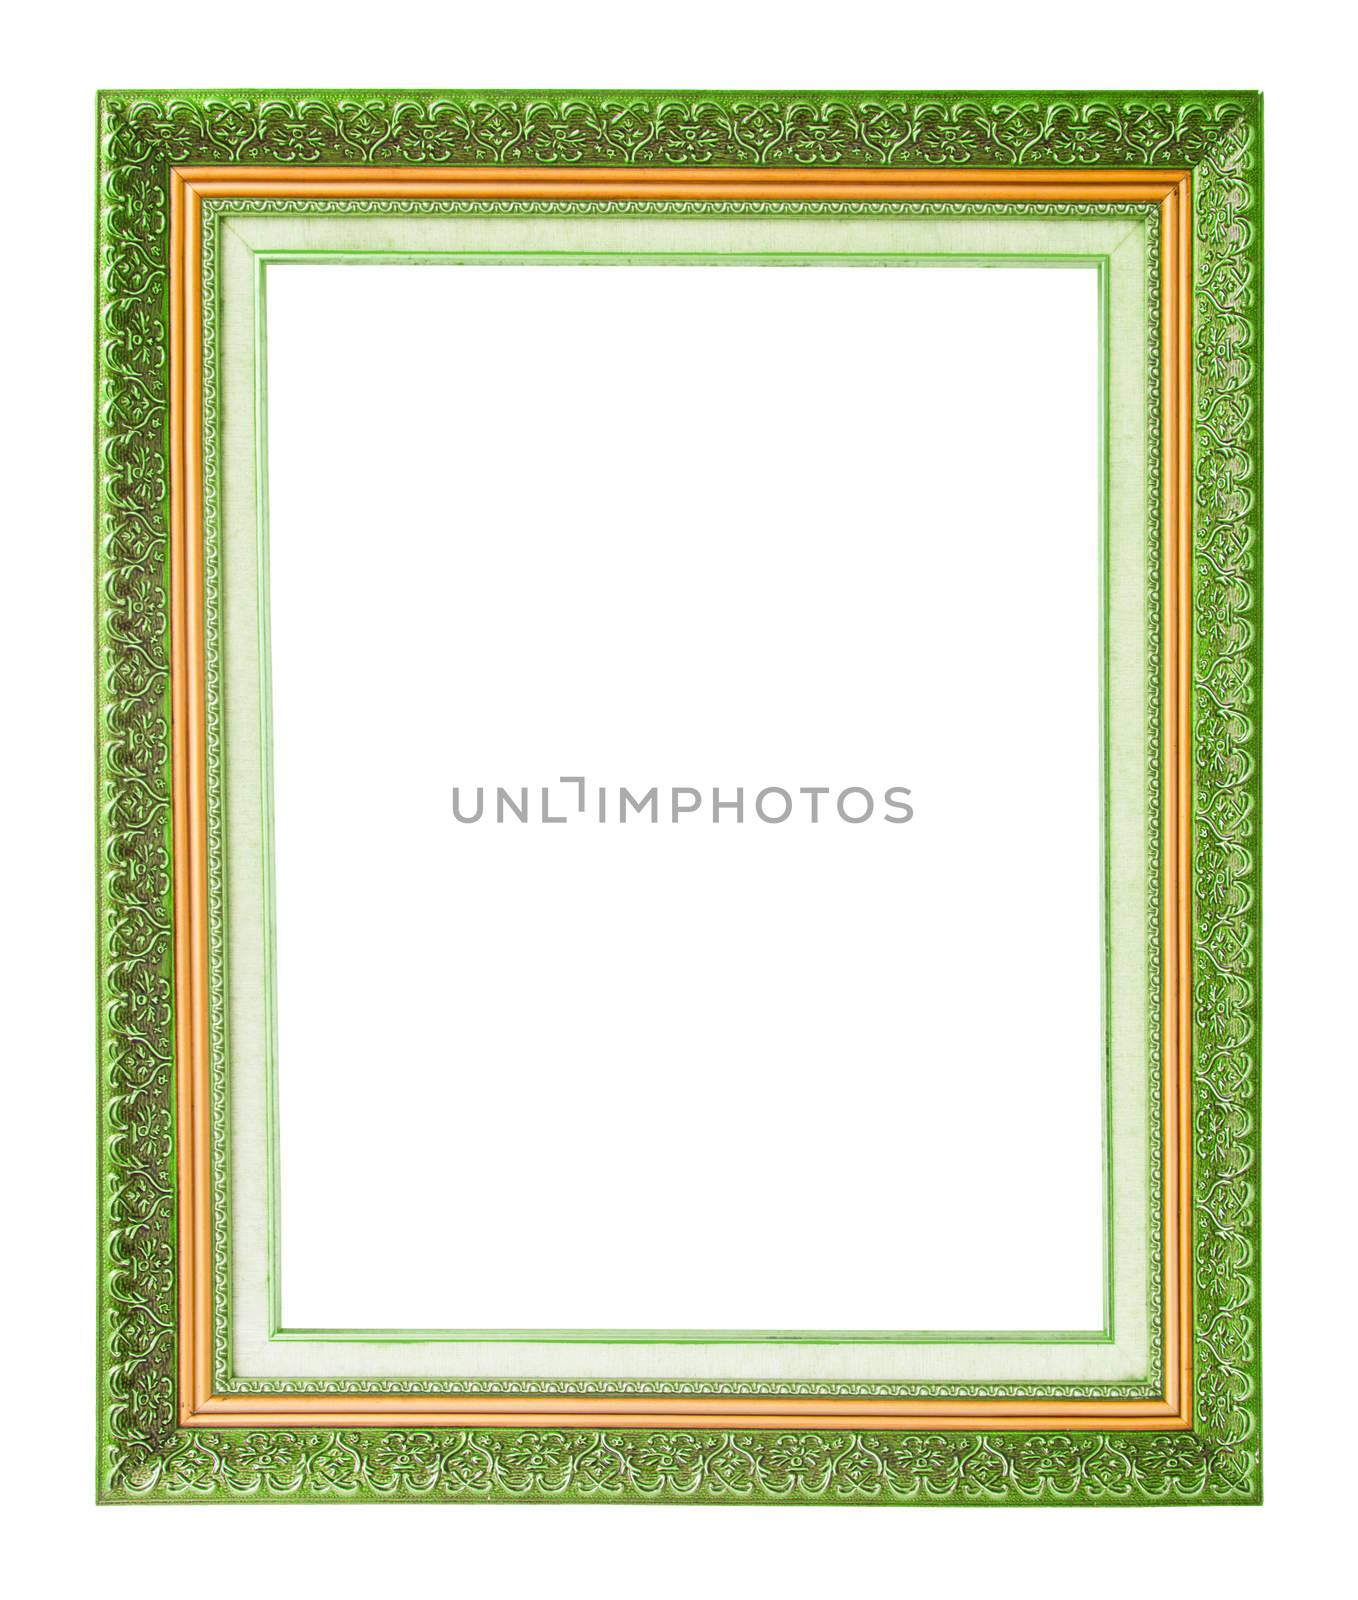 antique gold frame isolated on white background by Gamjai